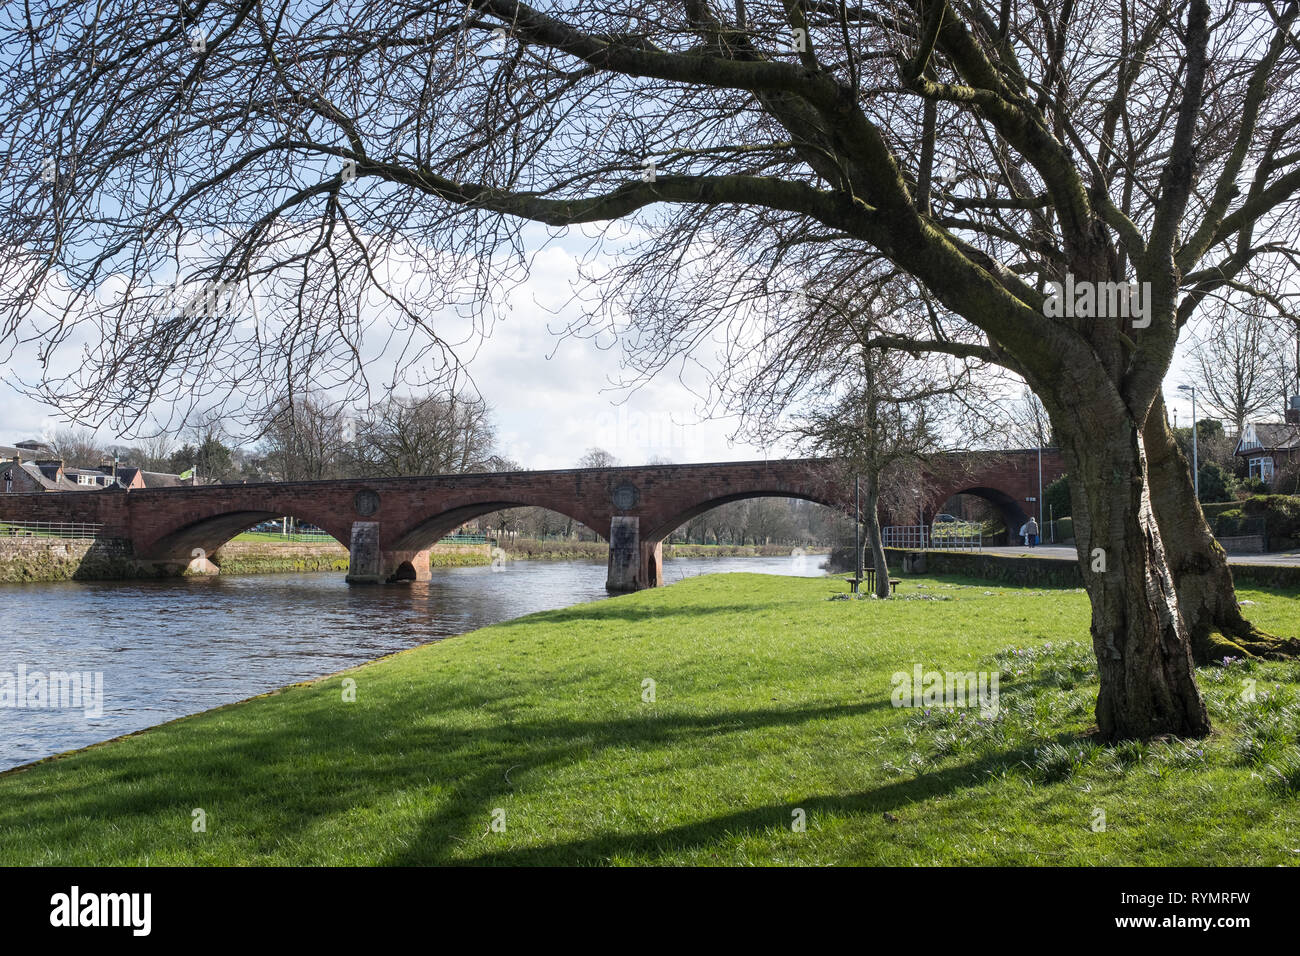 A view of St. Michael's Bridge over the River Nith in Dumfries, Scotland. Stock Photo